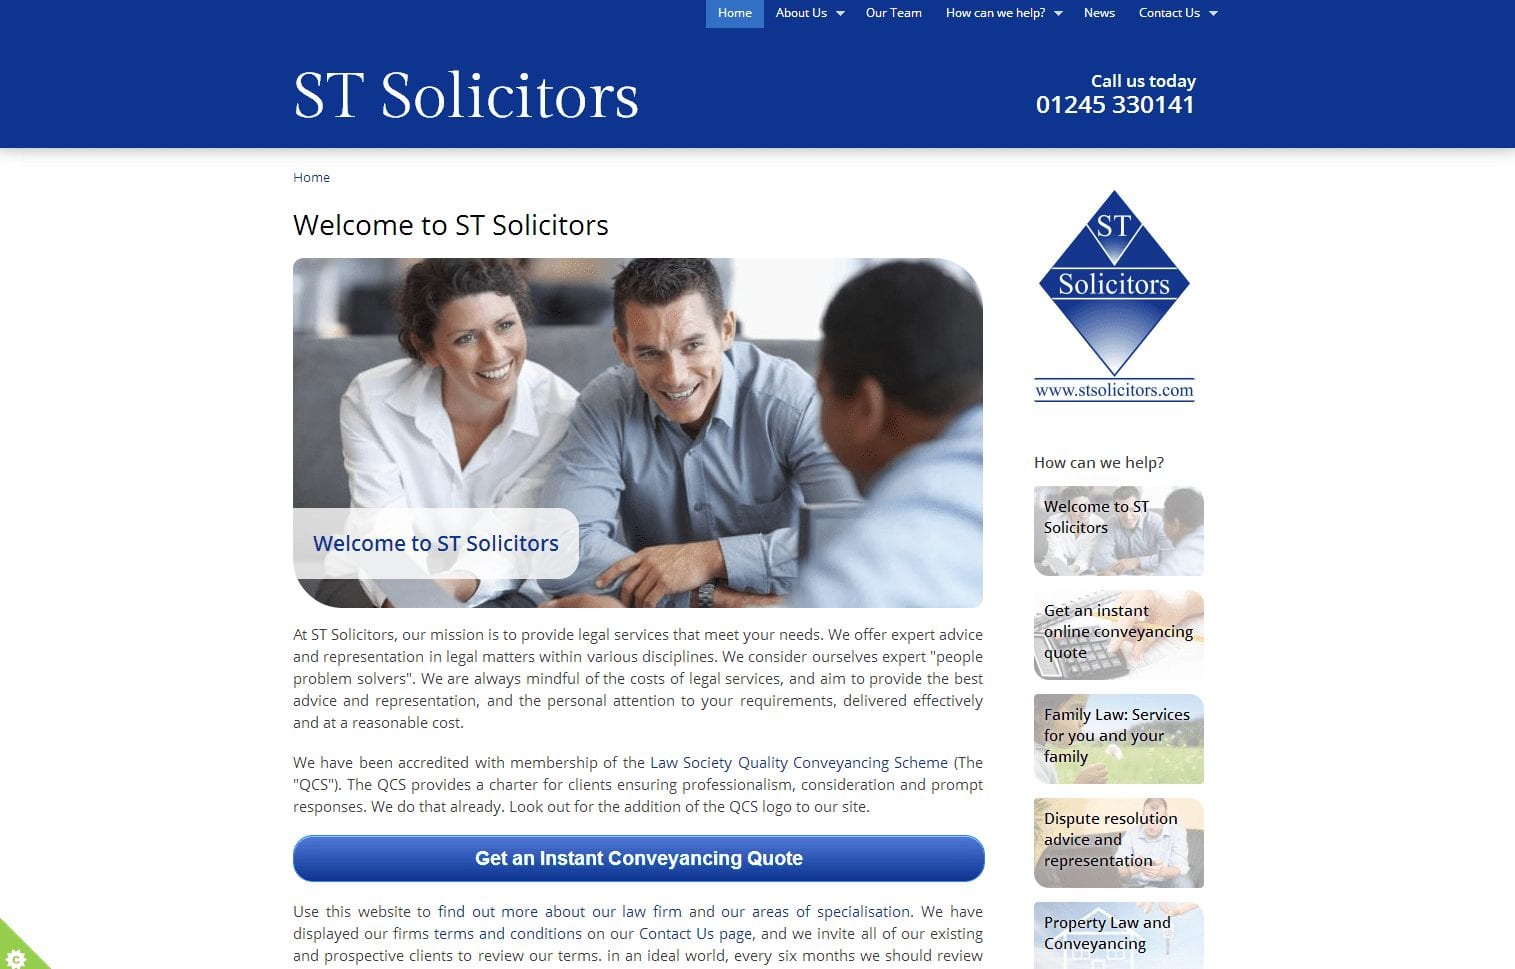 new-website-and-facebook-page-for-st-solicitors.png